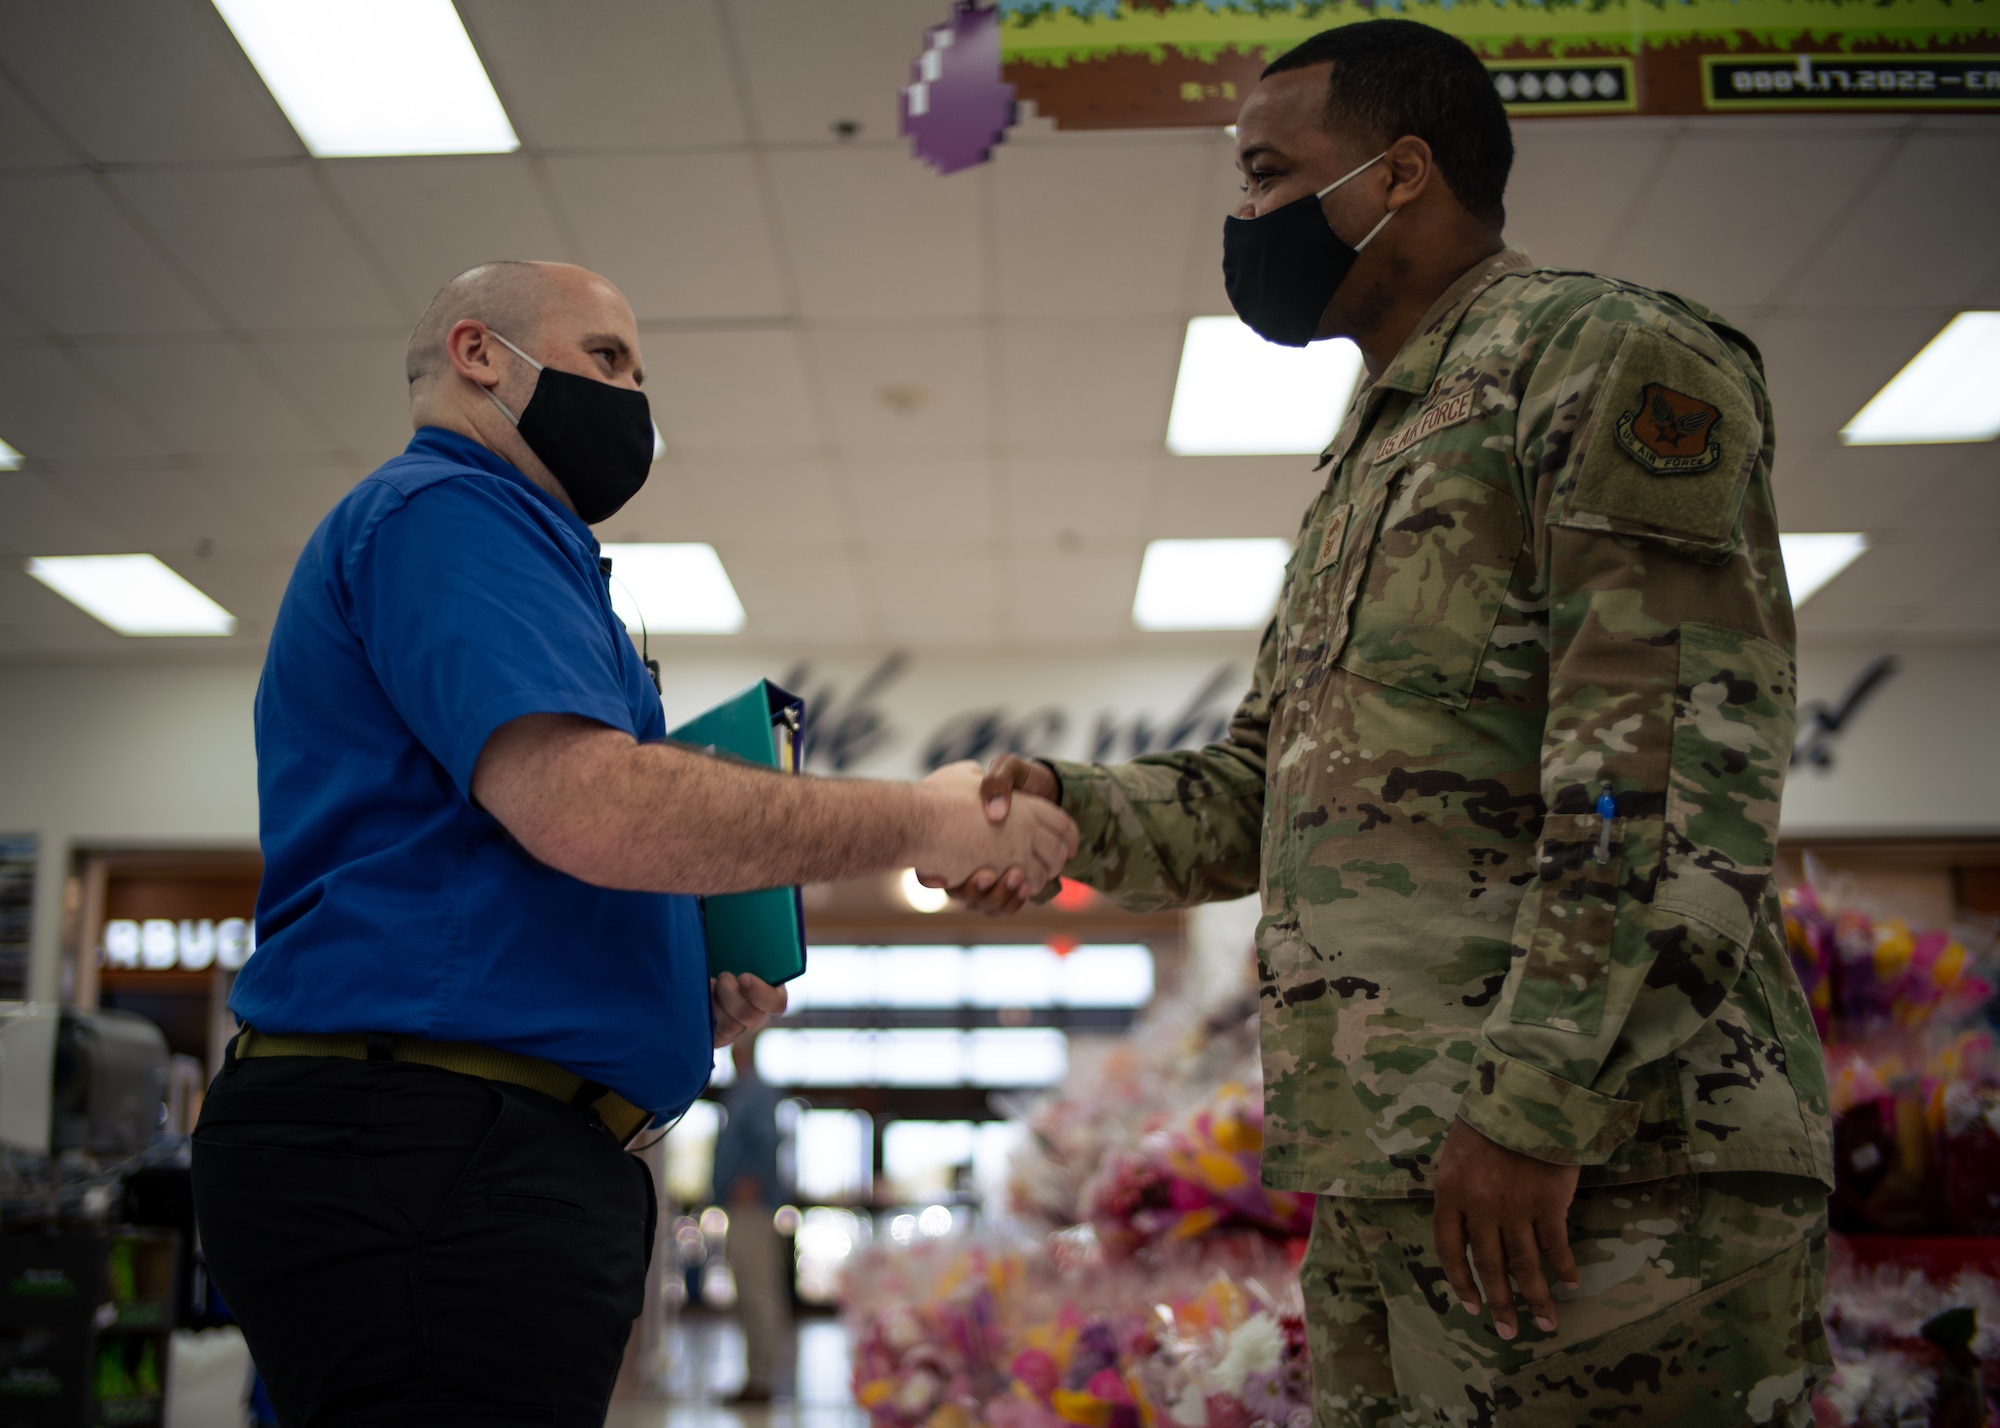 U.S. Air Force Chief Master Sgt. Kevin Osby, Army and Air Force Exchange Service’s senior enlisted advisor, coins an Exchange associate for his dedicated service at MacDill Air Force Base, Florida, Feb. 22, 2022.